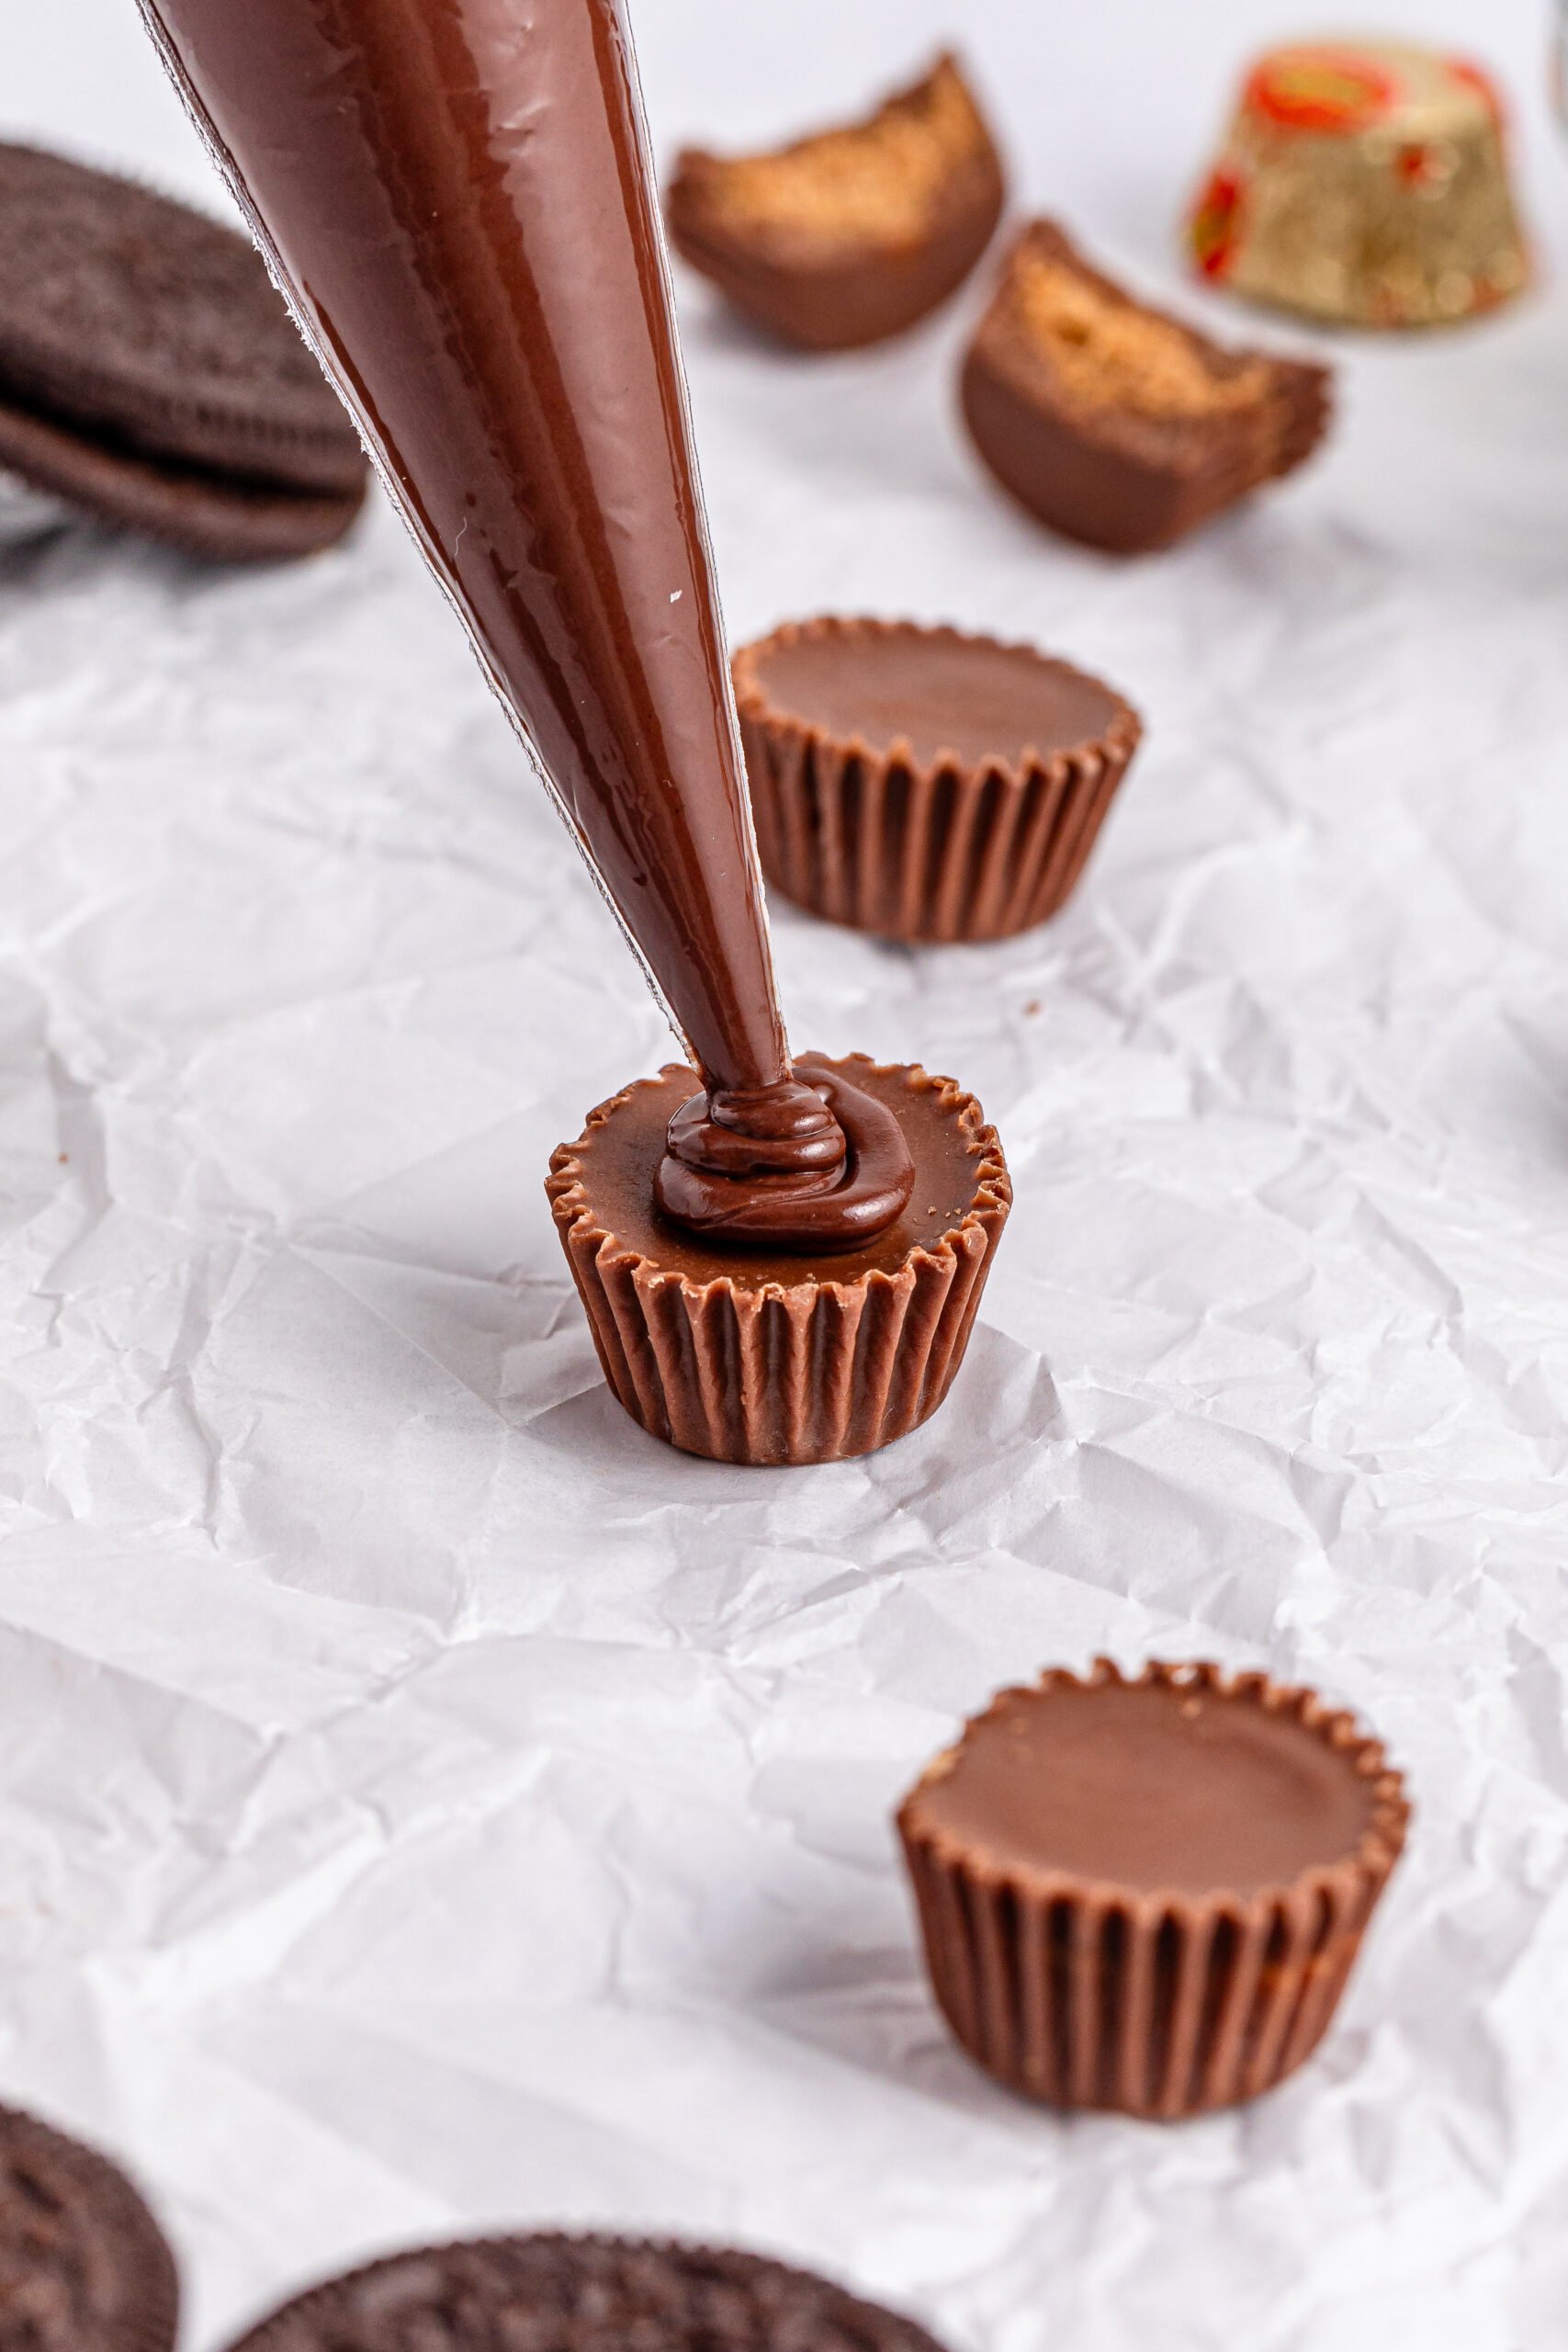 peanut butter cup with chocolate being added